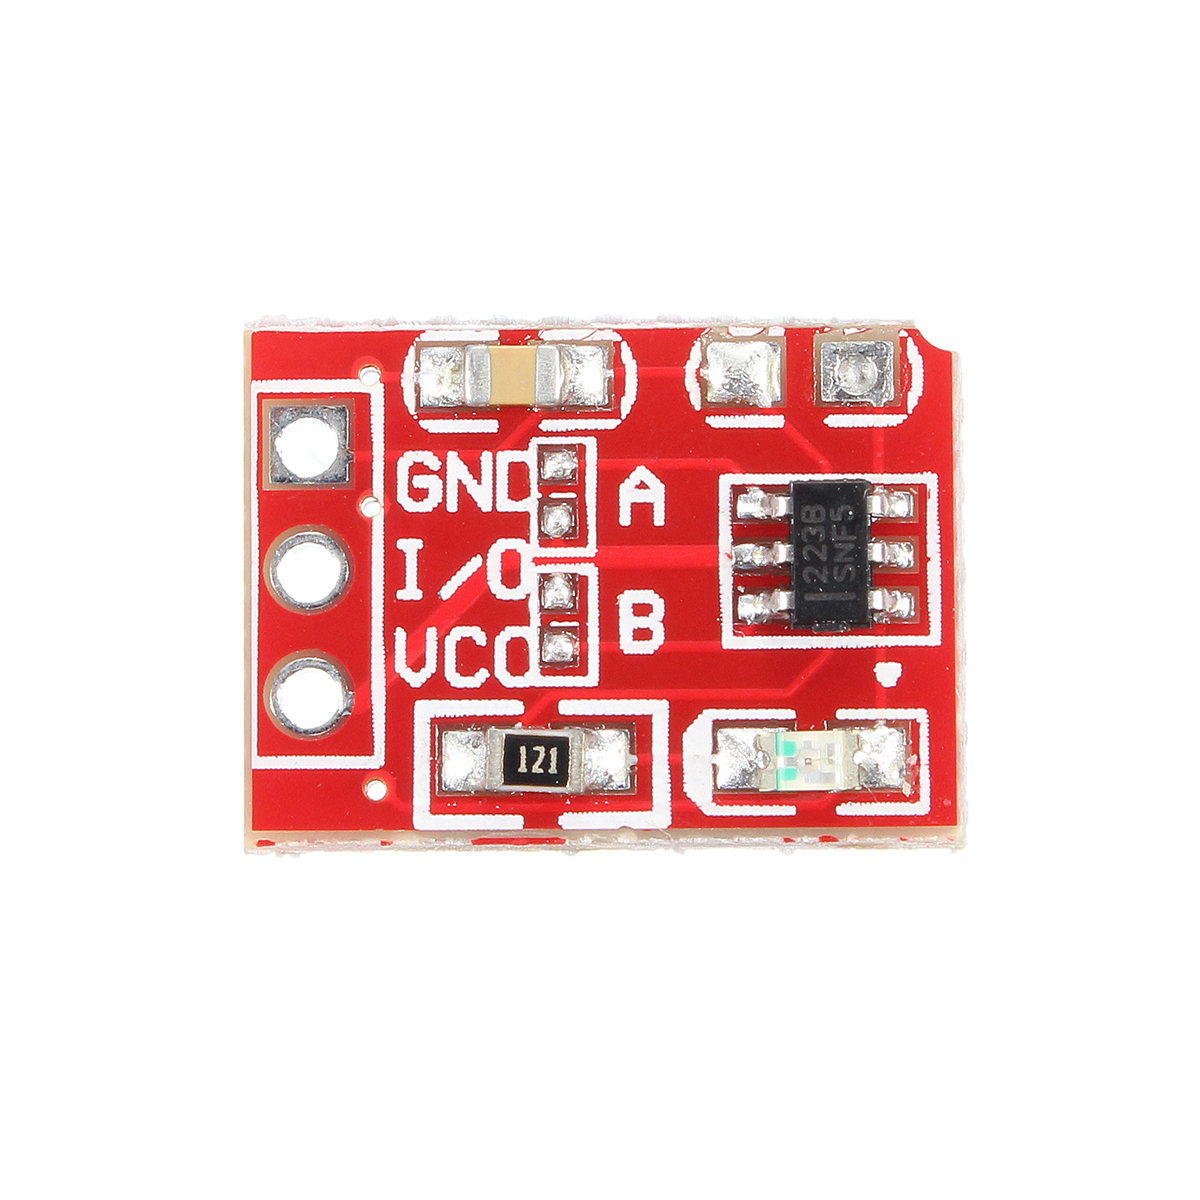 3pcs-25-55V-TTP223-Capacitive-Touch-Switch-Button-Self-Lock-Module-1338050